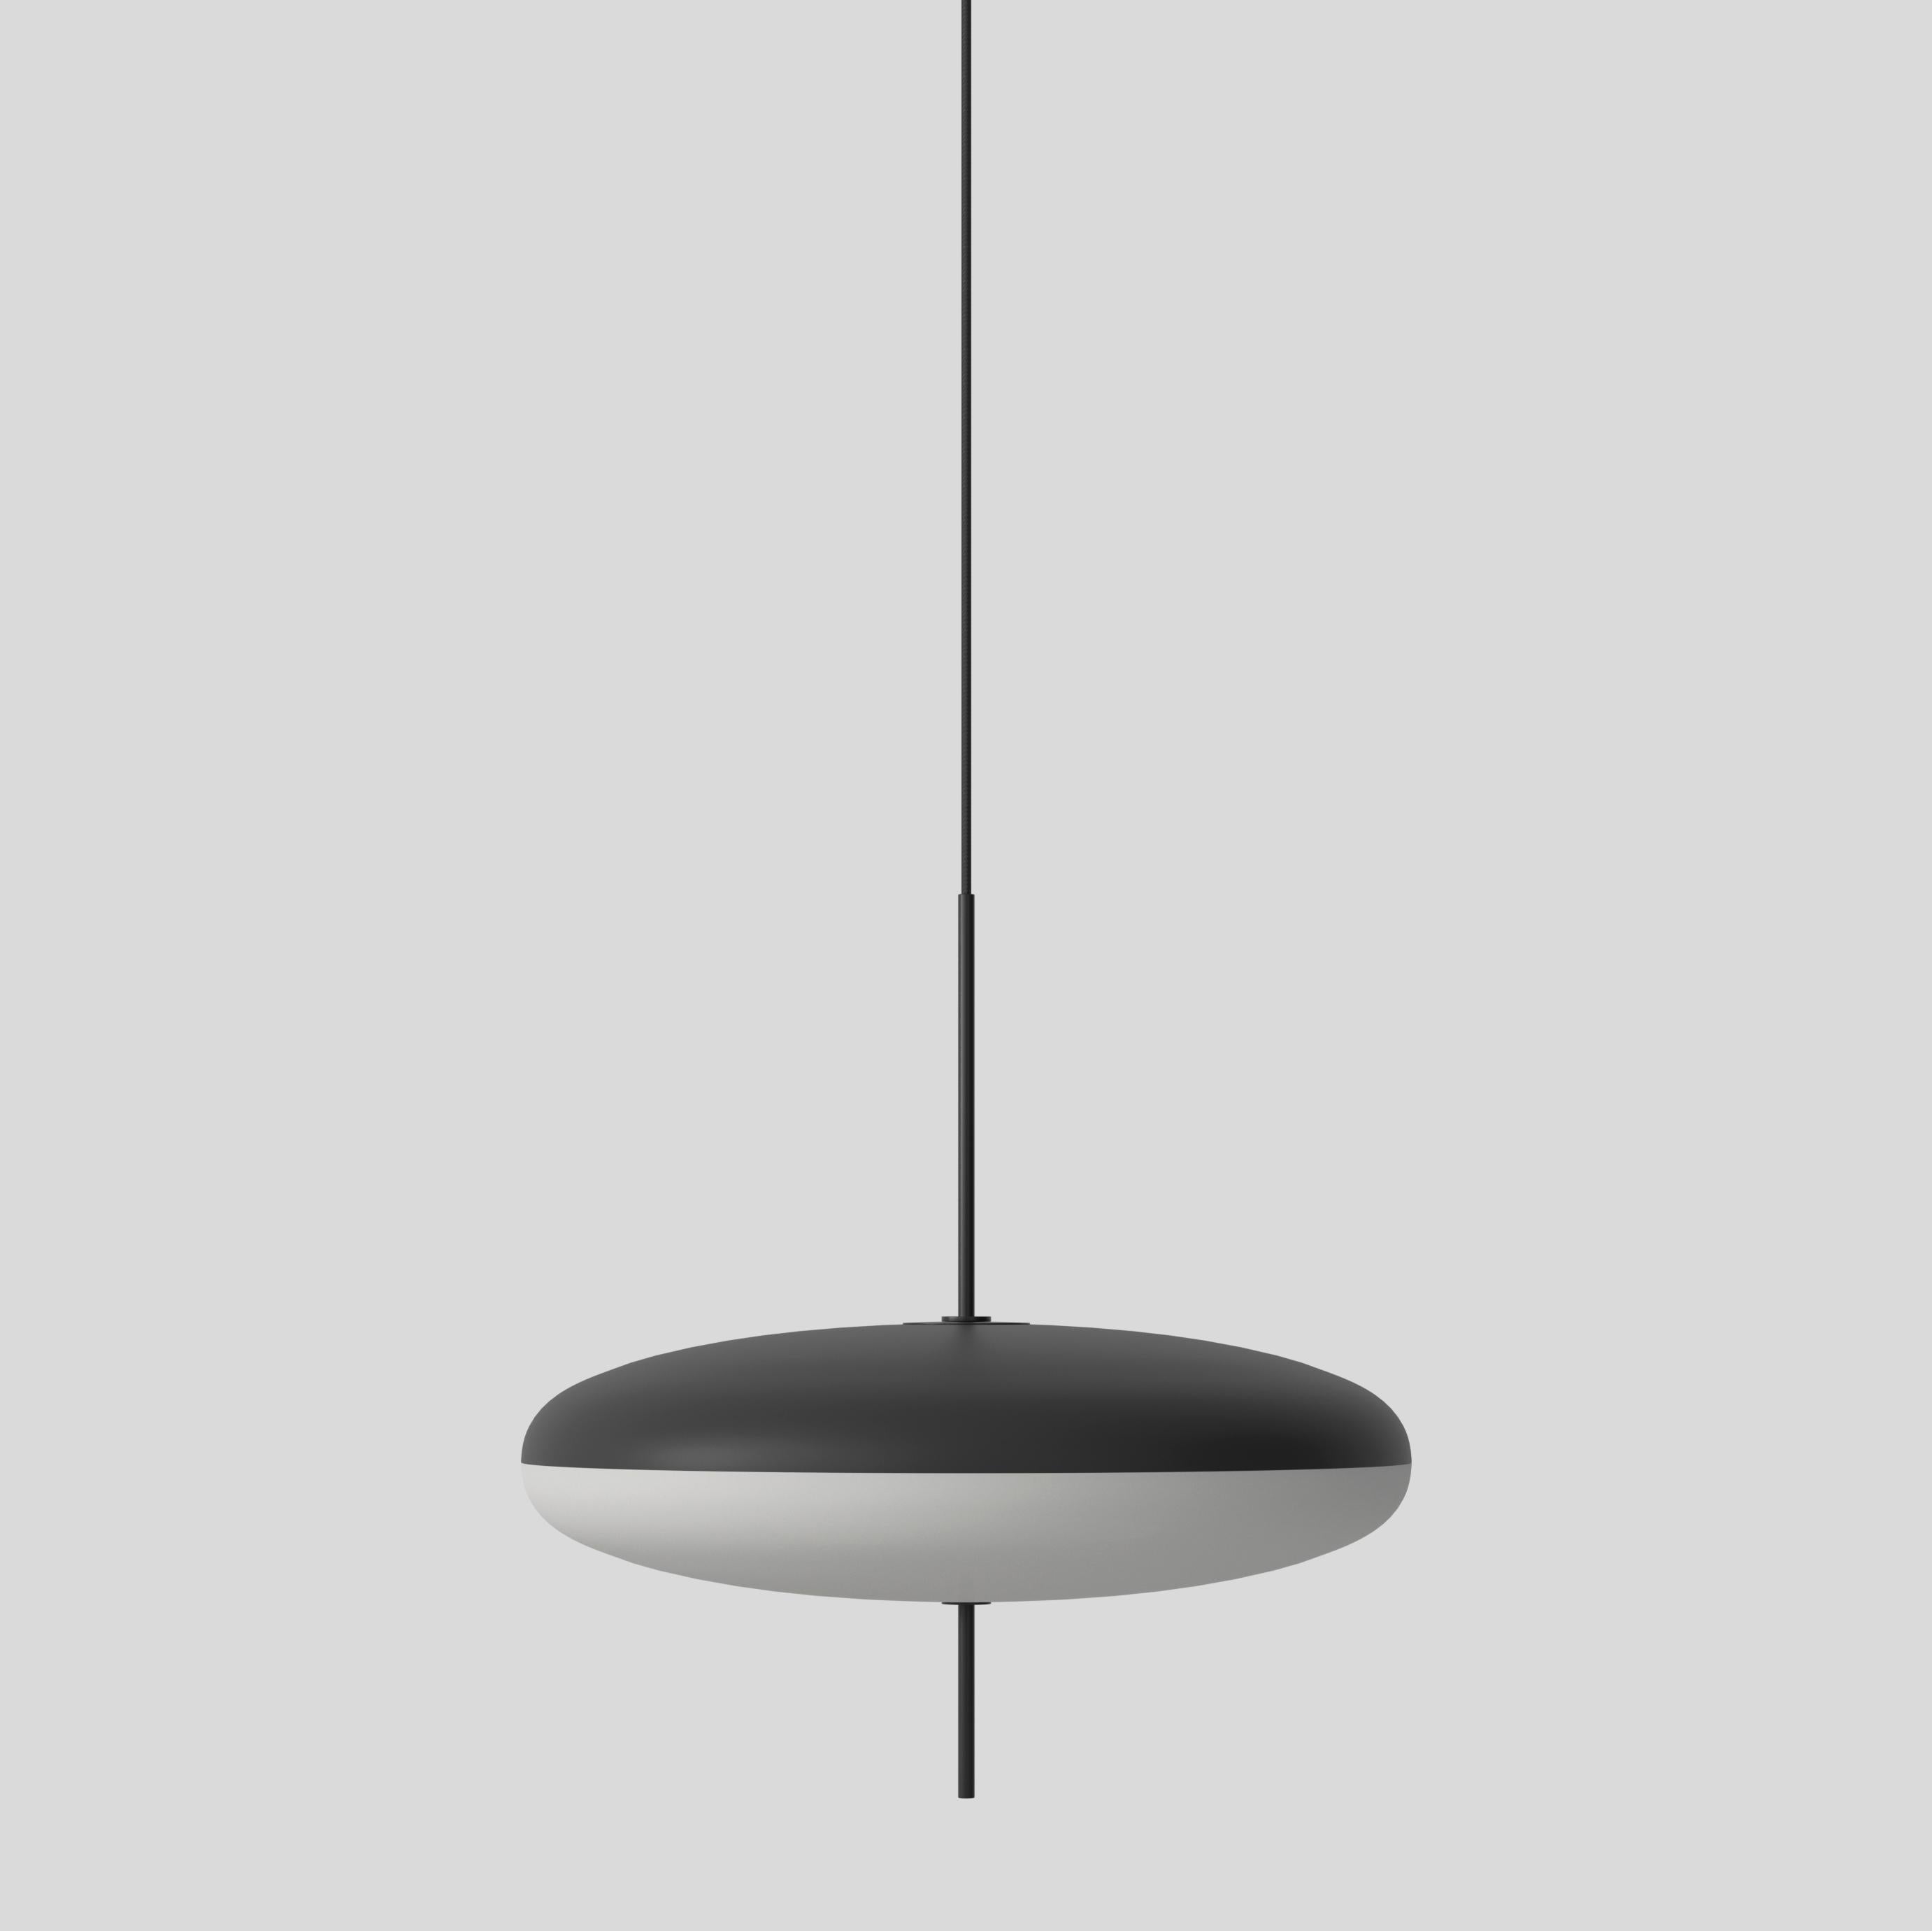 Painted Gino Sarfatti Model No. 2065 Ceiling Light in Black and White for Astep For Sale